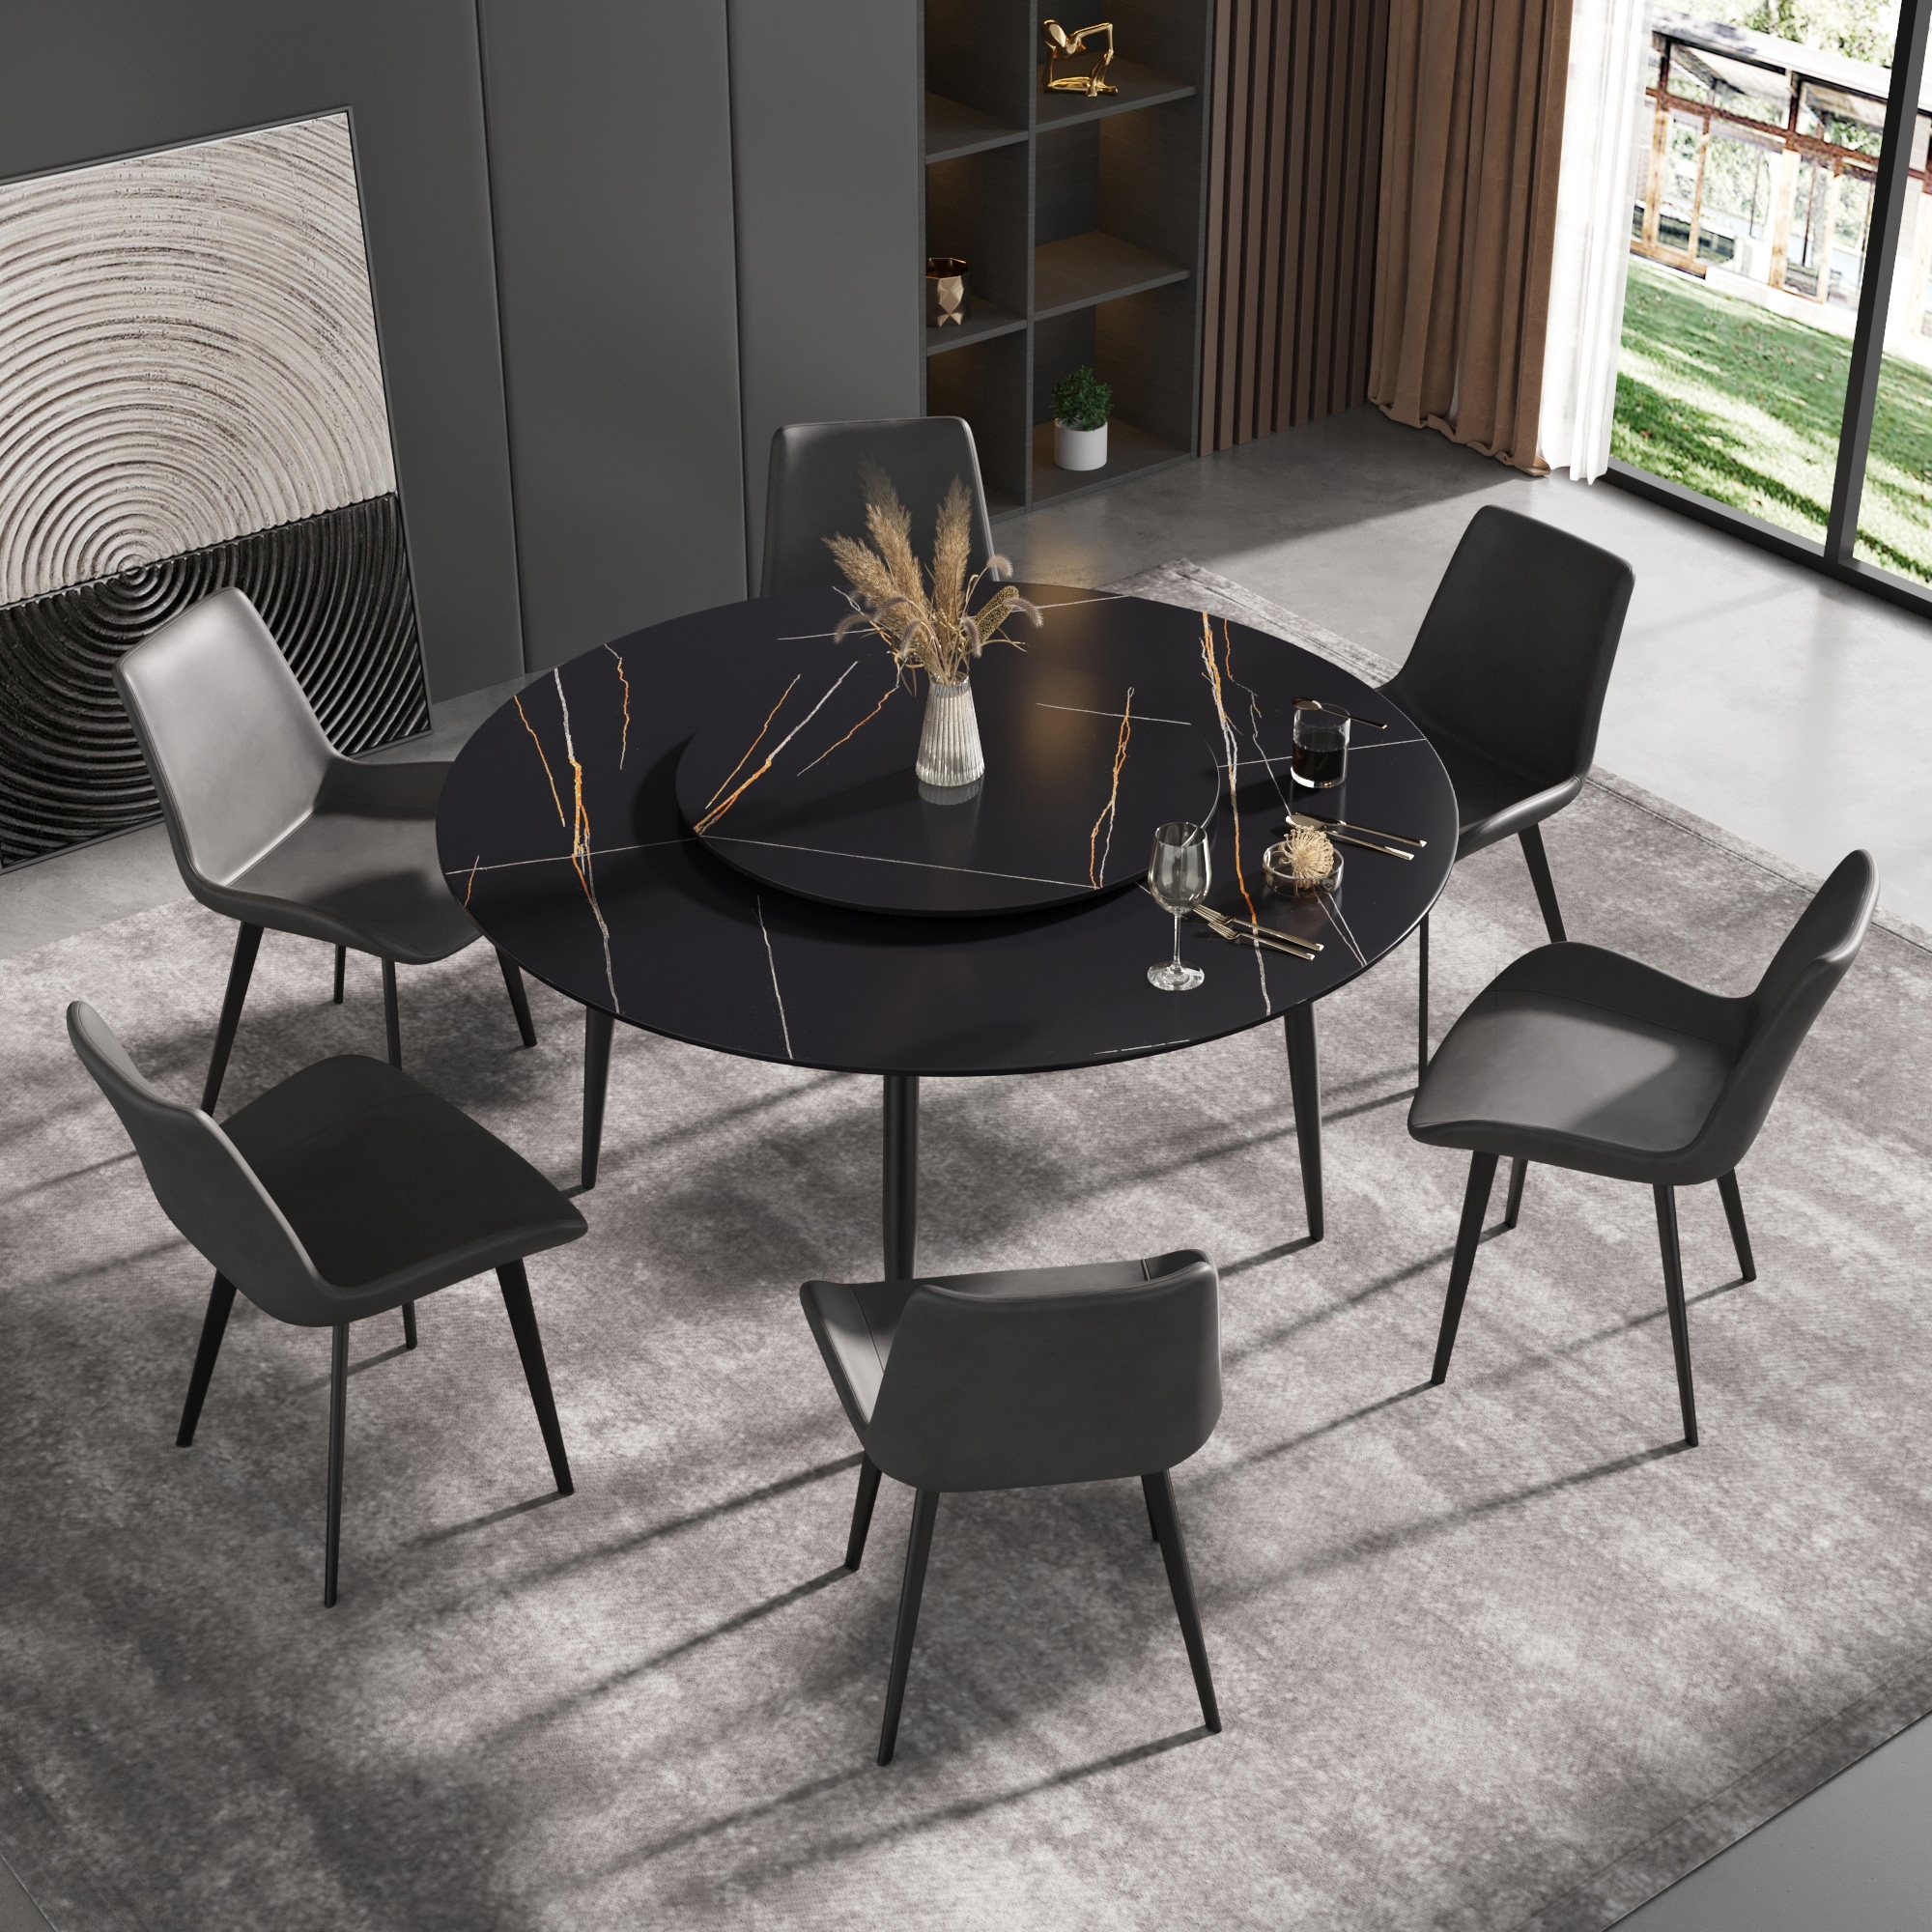 https://ak1.ostkcdn.com/images/products/is/images/direct/61d96cd0c11edff6de8ab34d566888d2c689691a/Simple-Modern-Round-Dining-Table-for-Kitchen-Dining-Room-Restarant.jpg